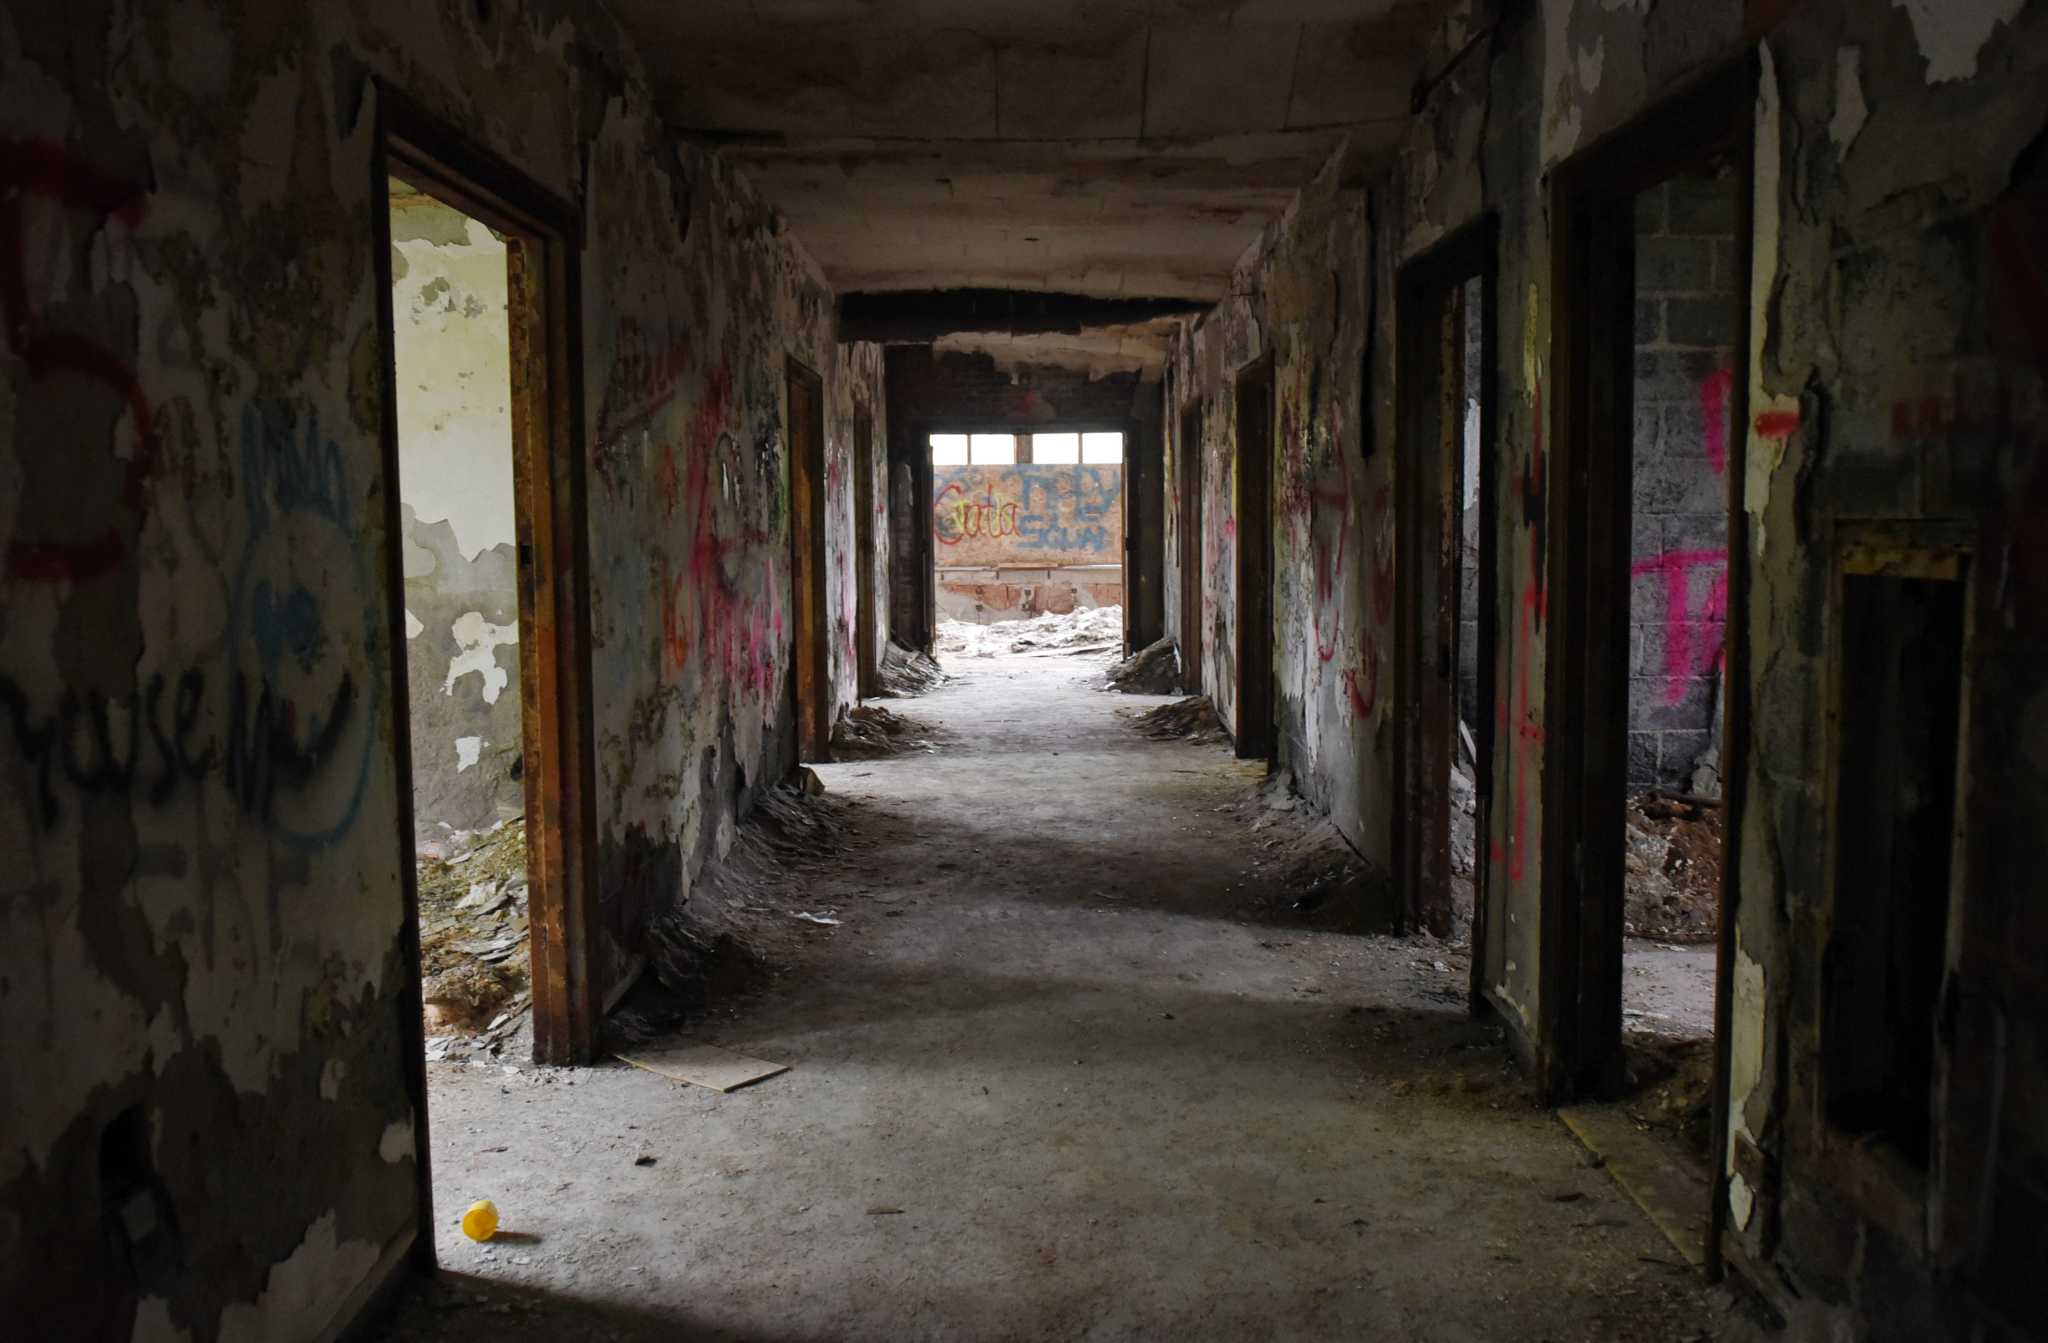 Who wants to buy Saratoga County #39 s shuttered asylum?